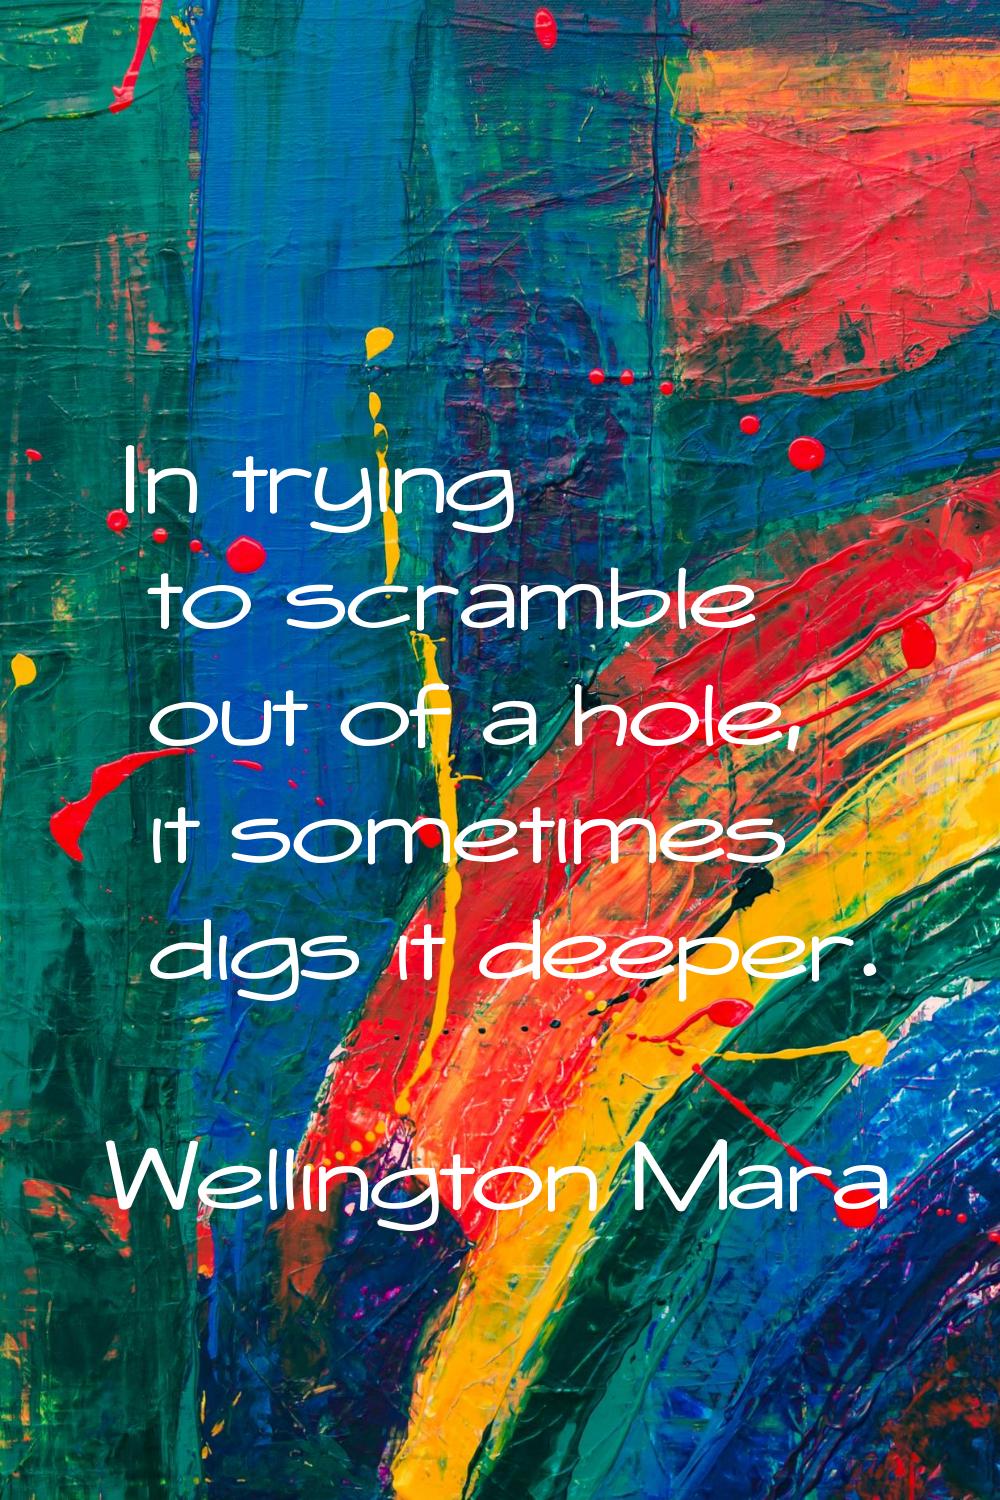 In trying to scramble out of a hole, it sometimes digs it deeper.